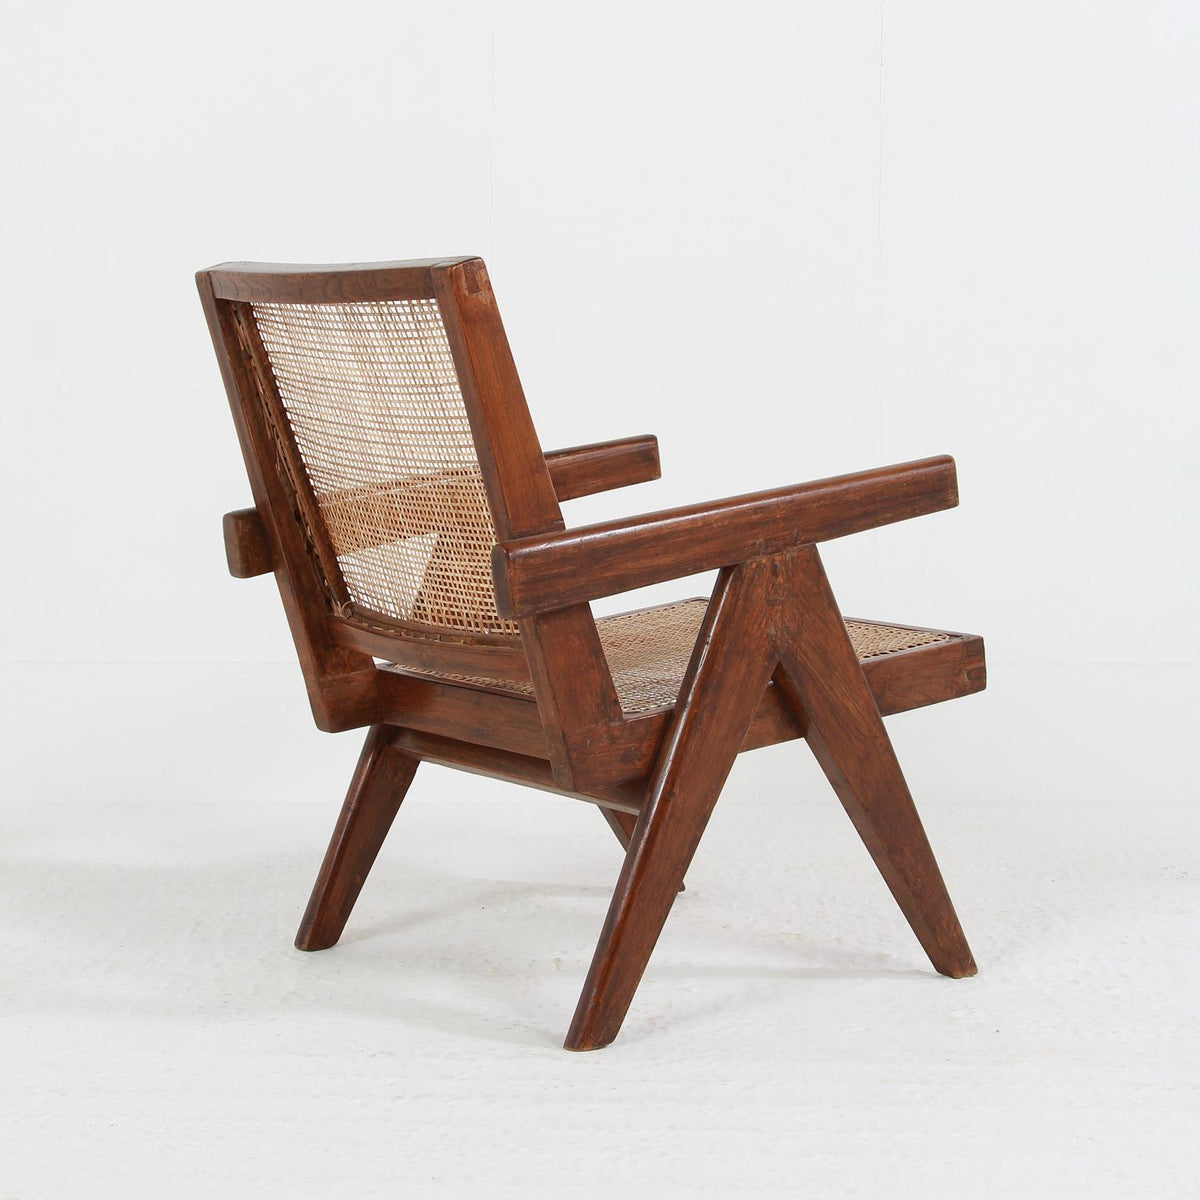 PIERRE JEANNERET MID-CENTURY LOW EASY CHAIR IN TEAK.Price on request